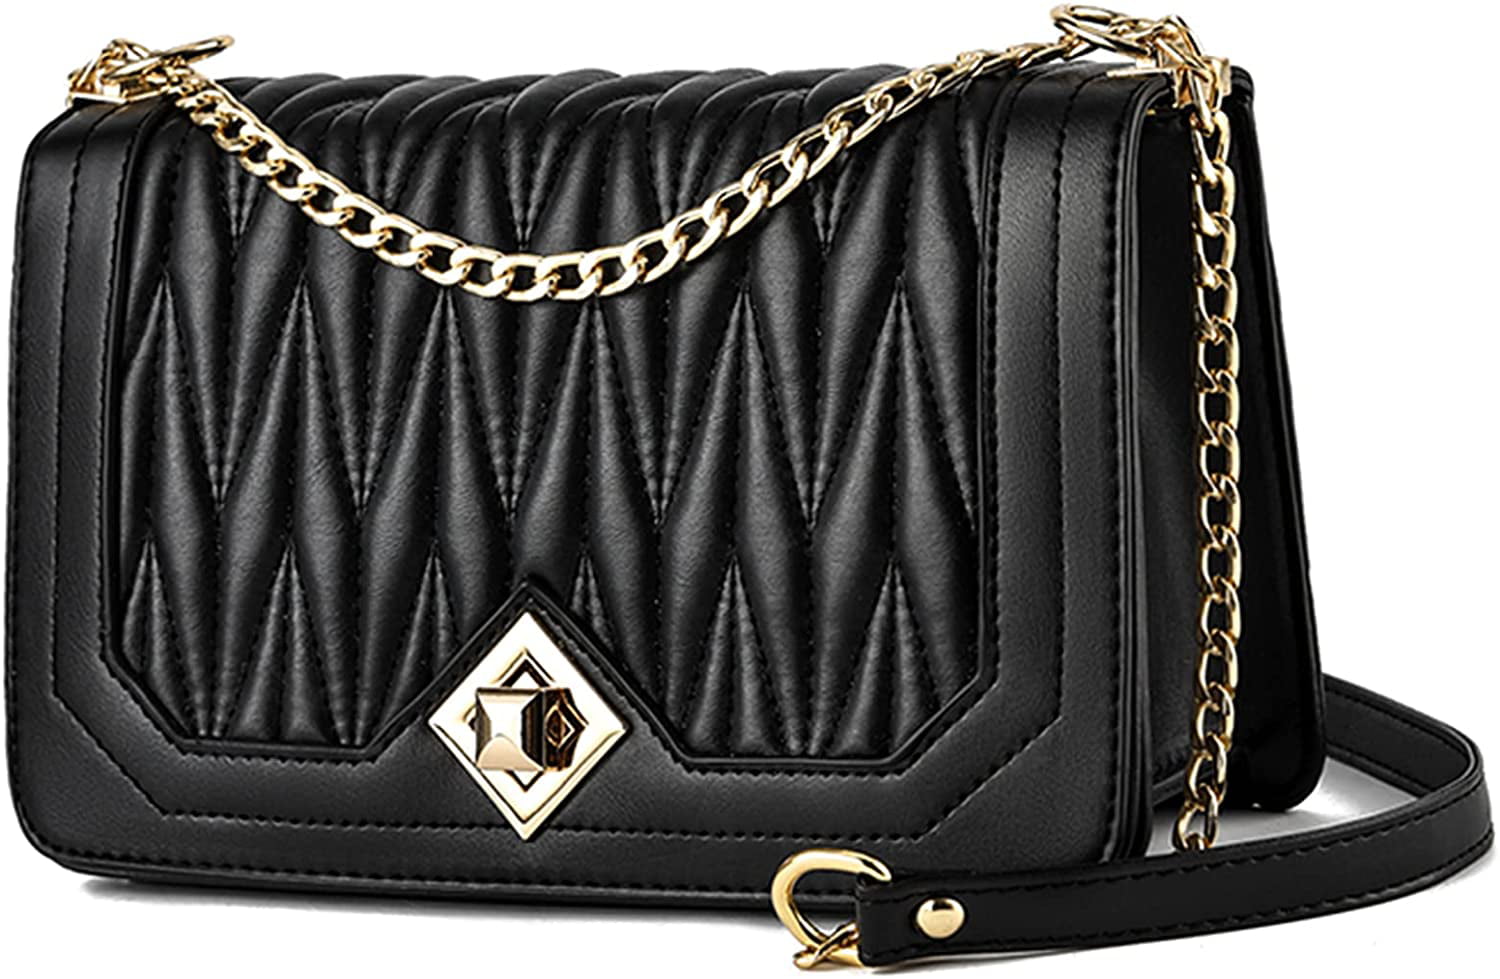 Eveupp Quilted Purse with Chain Strap Black Crossbody Bags for Women Faux Leather Shoulder Bag Clutch Purses